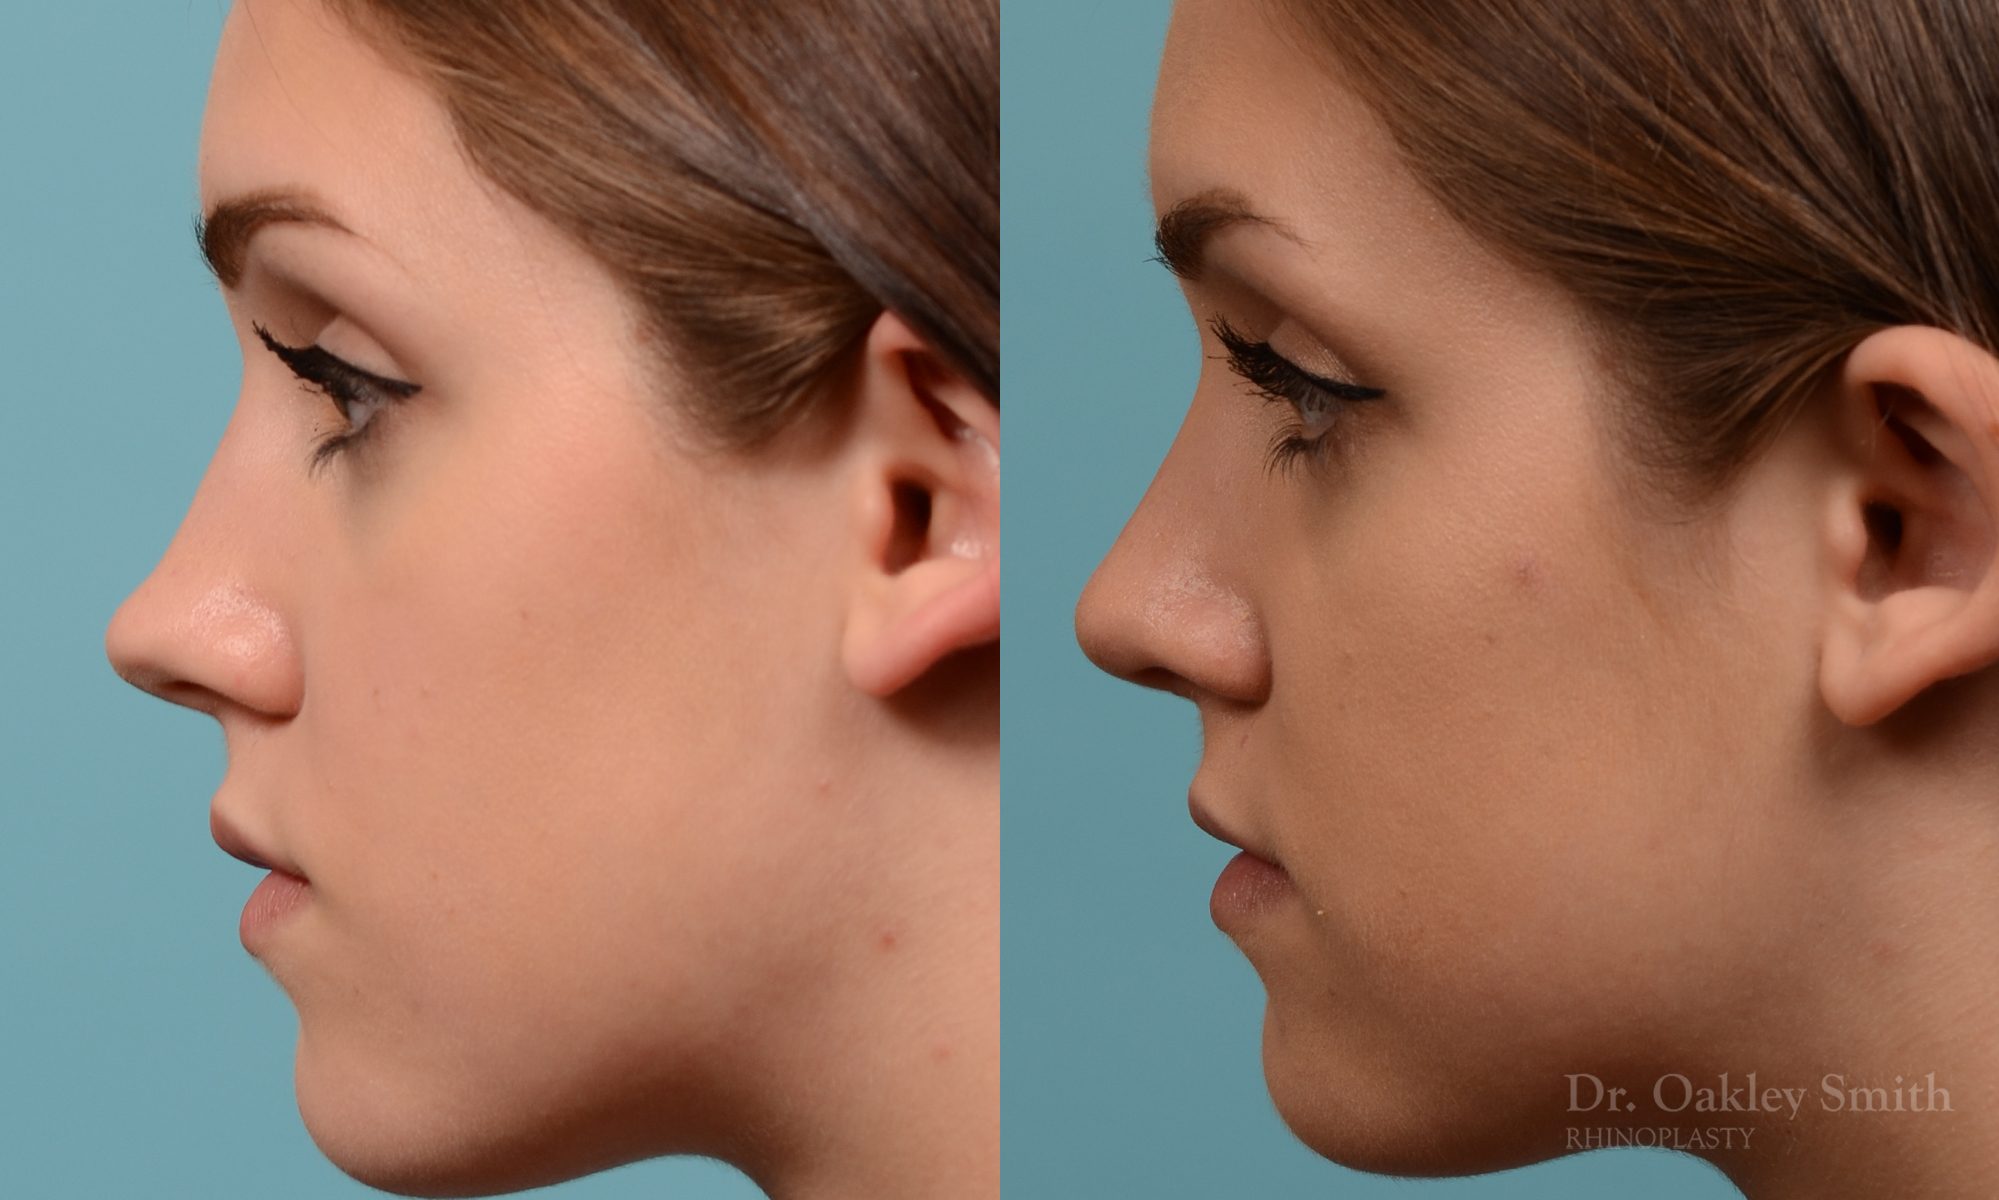 Rhinoplasty to smoothen the tip of nose